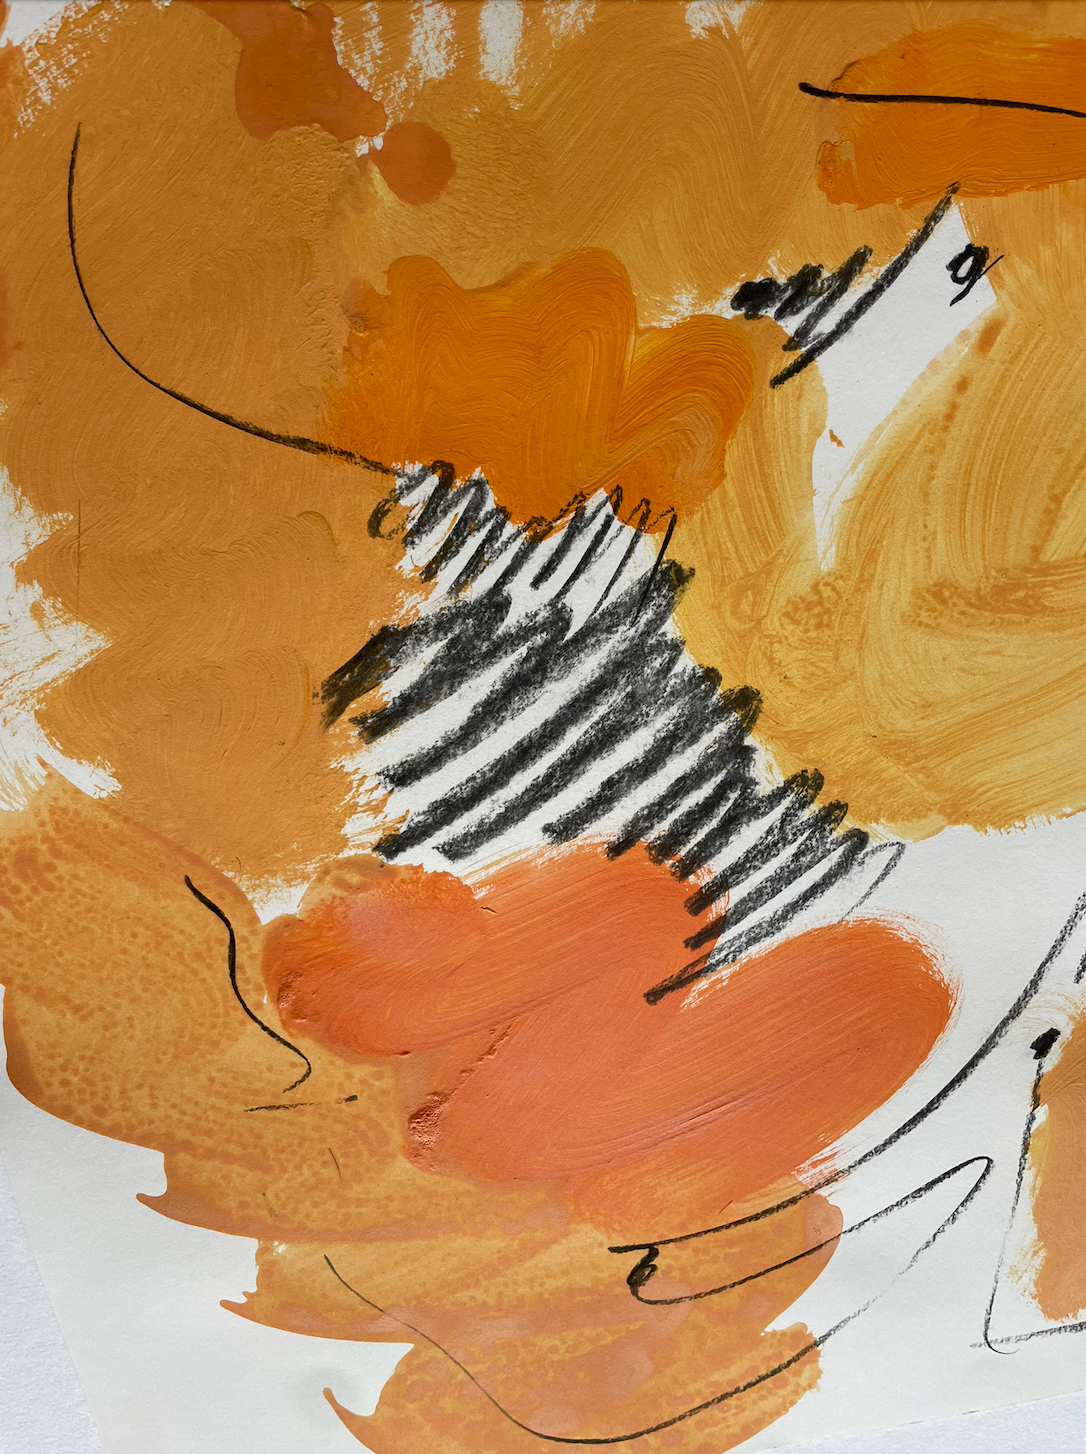 ANA KERIN - Emotional landscape in orange and yellow "spaces"